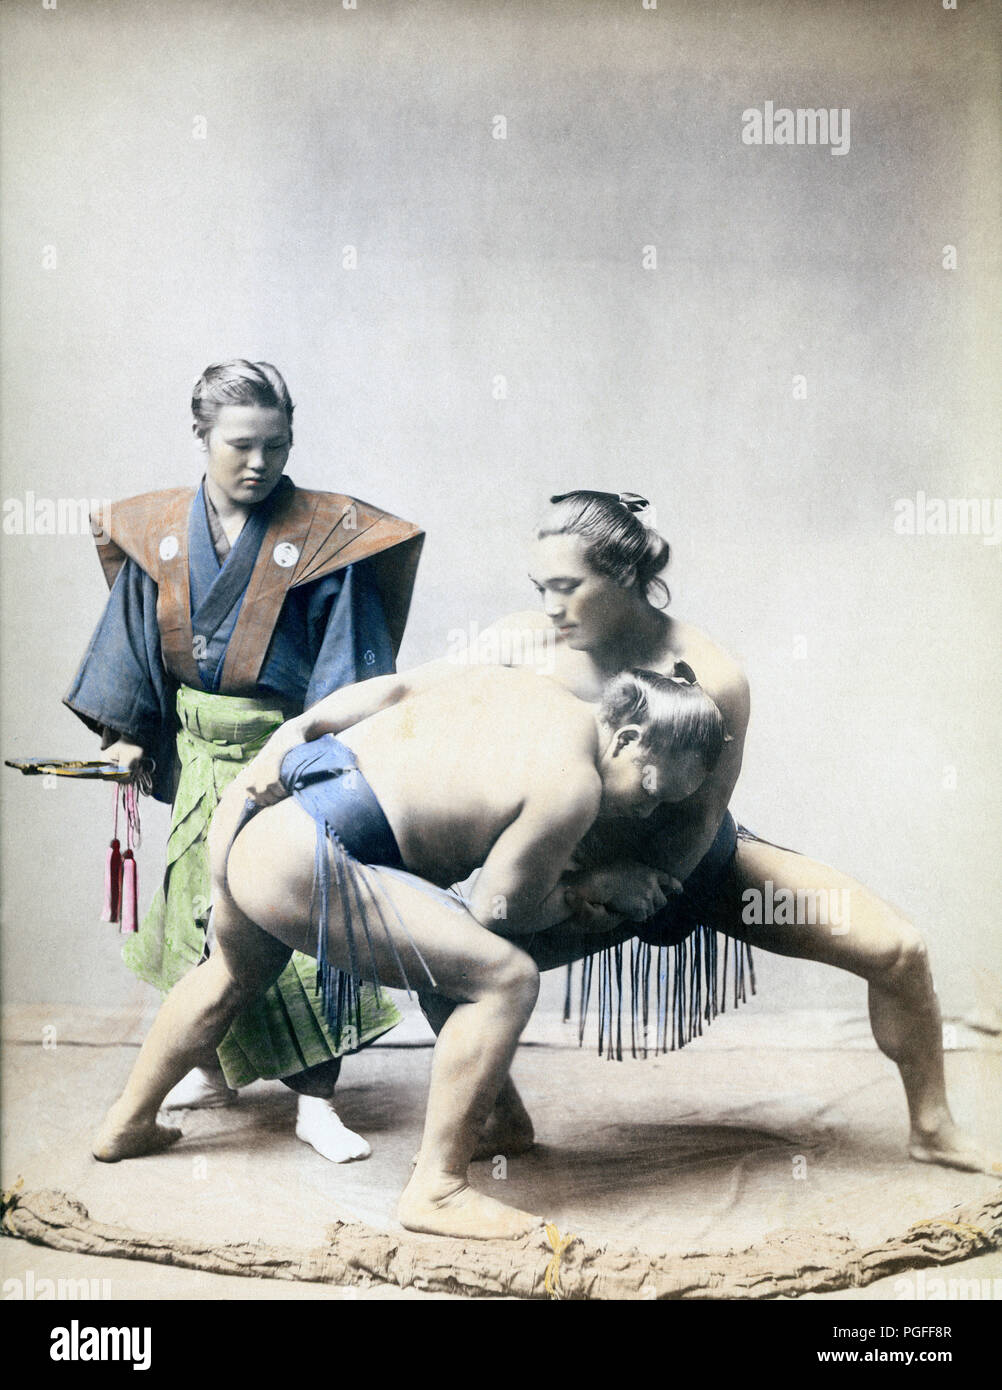 [ c. 1890s Japan - Sumo Wrestlers and Umpire ] —   Studio photograph of two rikishi (sumo wrestlers). In reality, the umpire would be wearing an eboshi (traditional black hat).  Albumen photograph published in 'Japan, Described and Illustrated by the Japanese', Shogun Edition edited by Captain F Brinkley. Published in 1897 by J B Millet Company, Boston Massachusetts, USA.  19th century vintage albumen photograph. Stock Photo